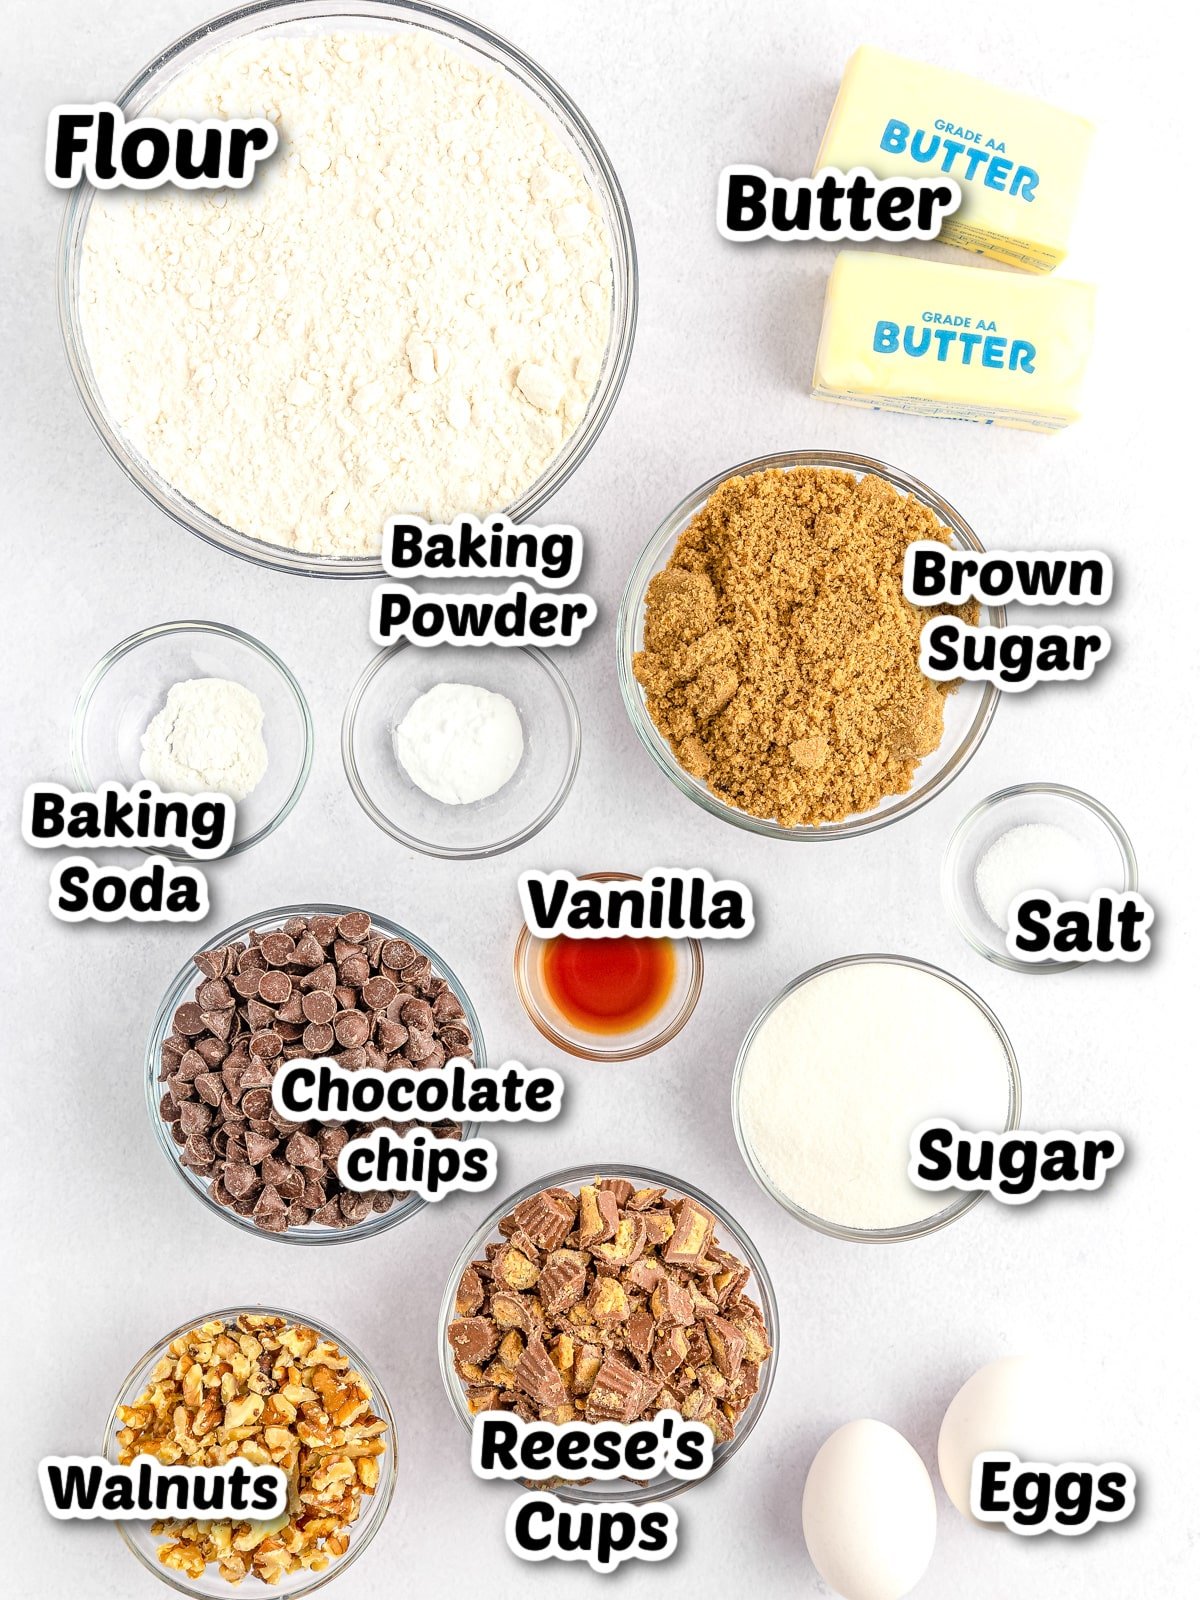 Ingredients for baking laid out on a table, including flour, butter, brown sugar, vanilla, eggs, and other items, each labeled with their respective names.